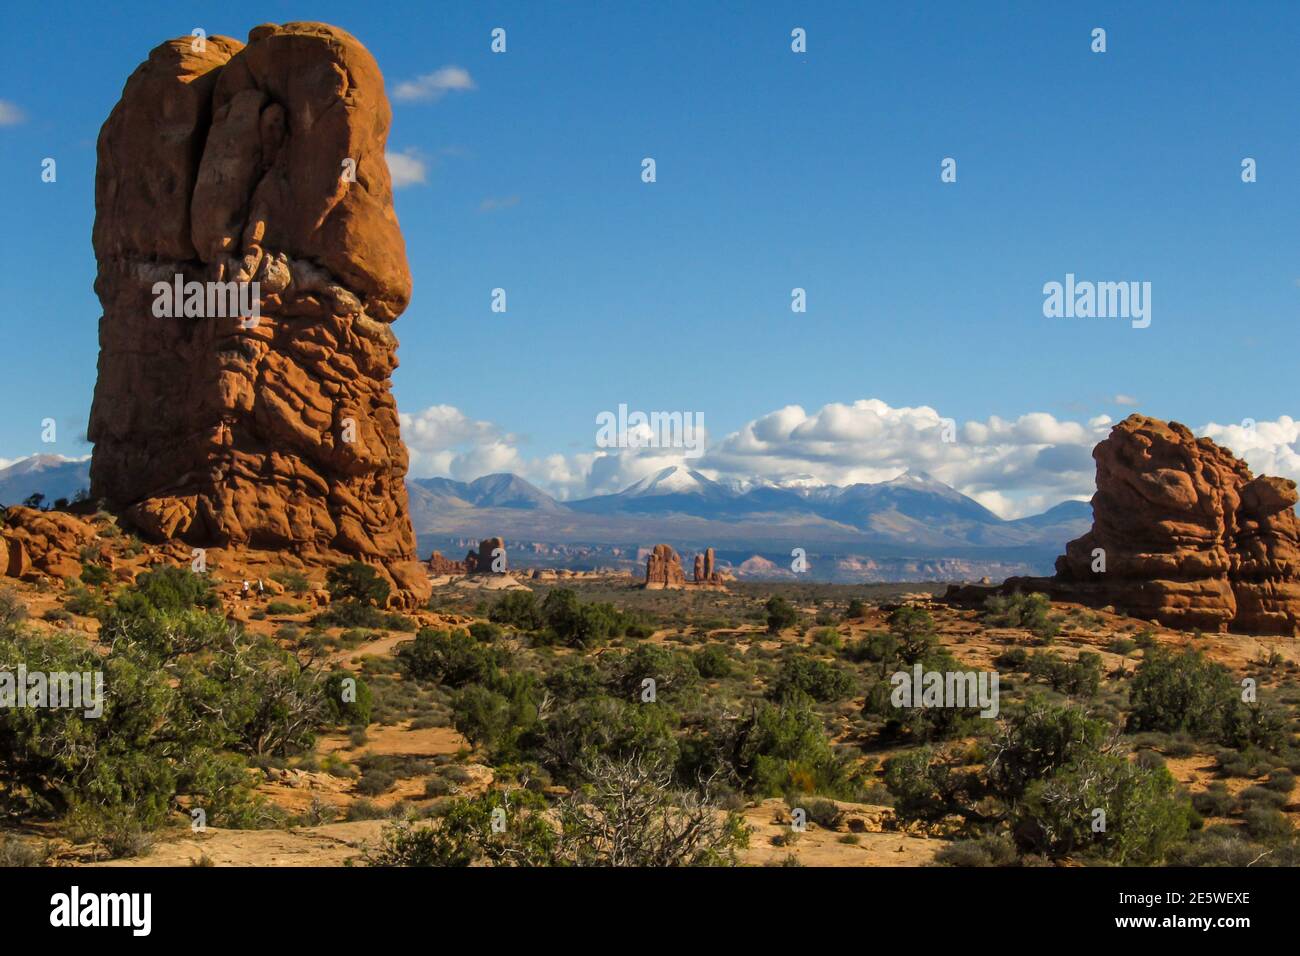 Strange towering weathered stone columns in the arid landscape of Archers National Park, Utah, with the snow-capped mountains in the background Stock Photo